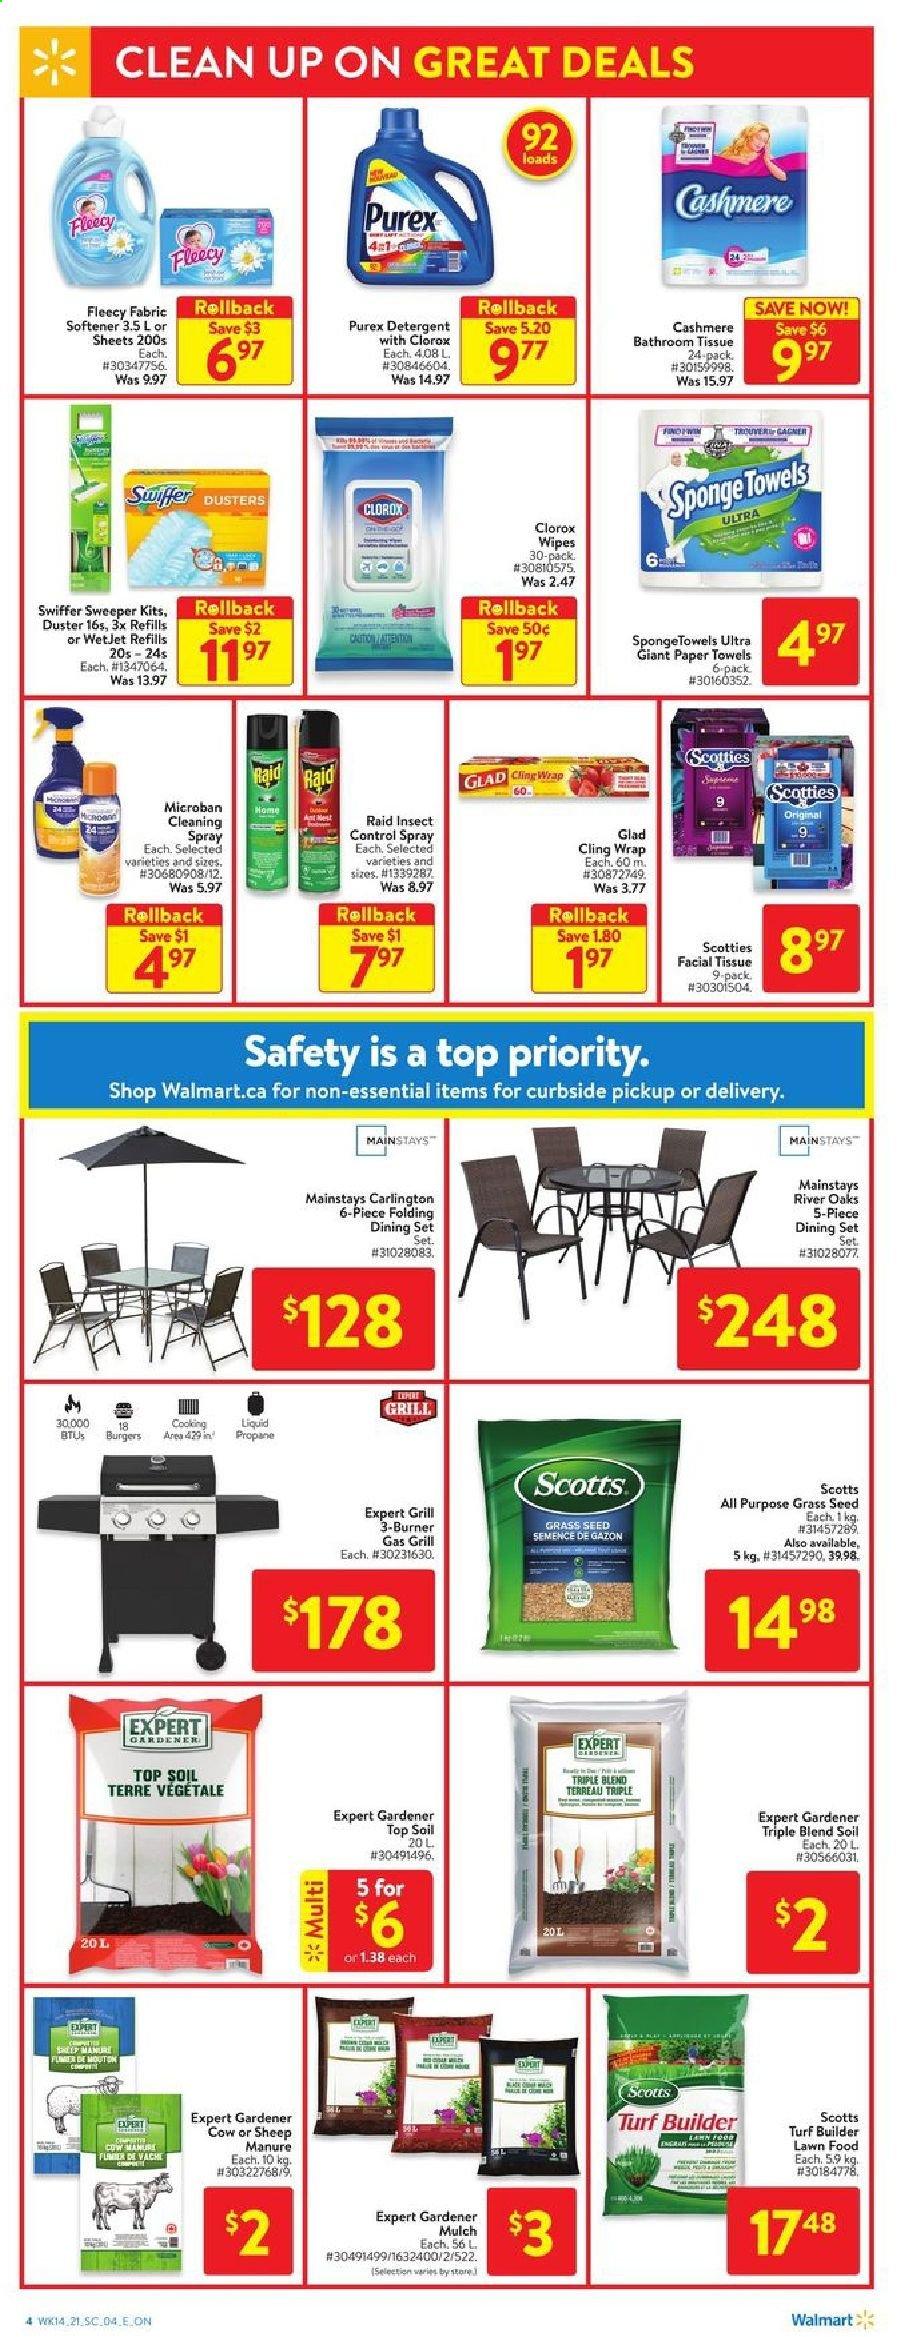 Walmart flyer  - April 29, 2021 - May 05, 2021. Page 10.